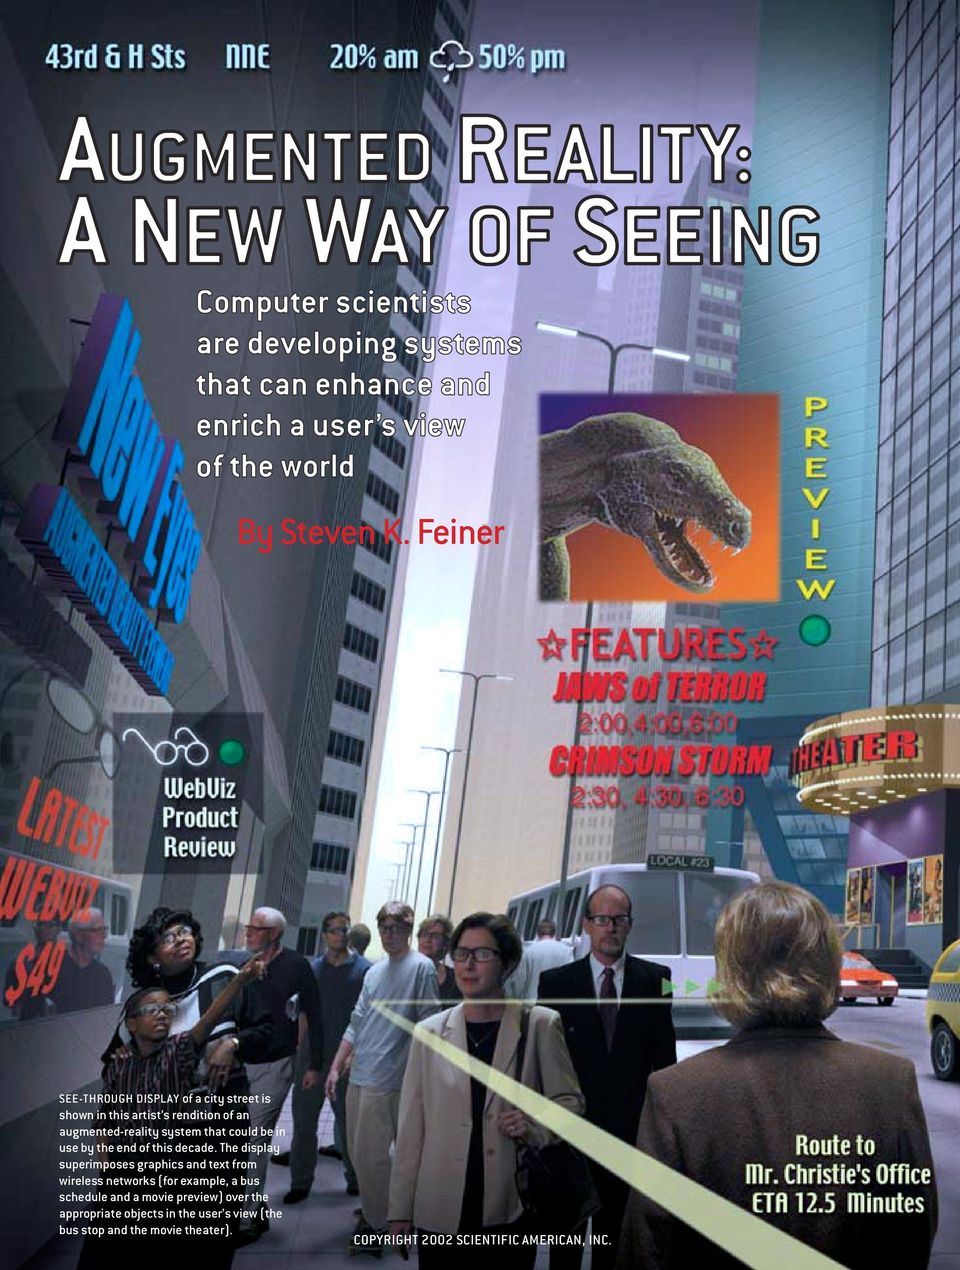 Feiner SEE-THROUGH DISPLAY of a city street is shown in this artist s rendition of an augmented-reality system that could be in